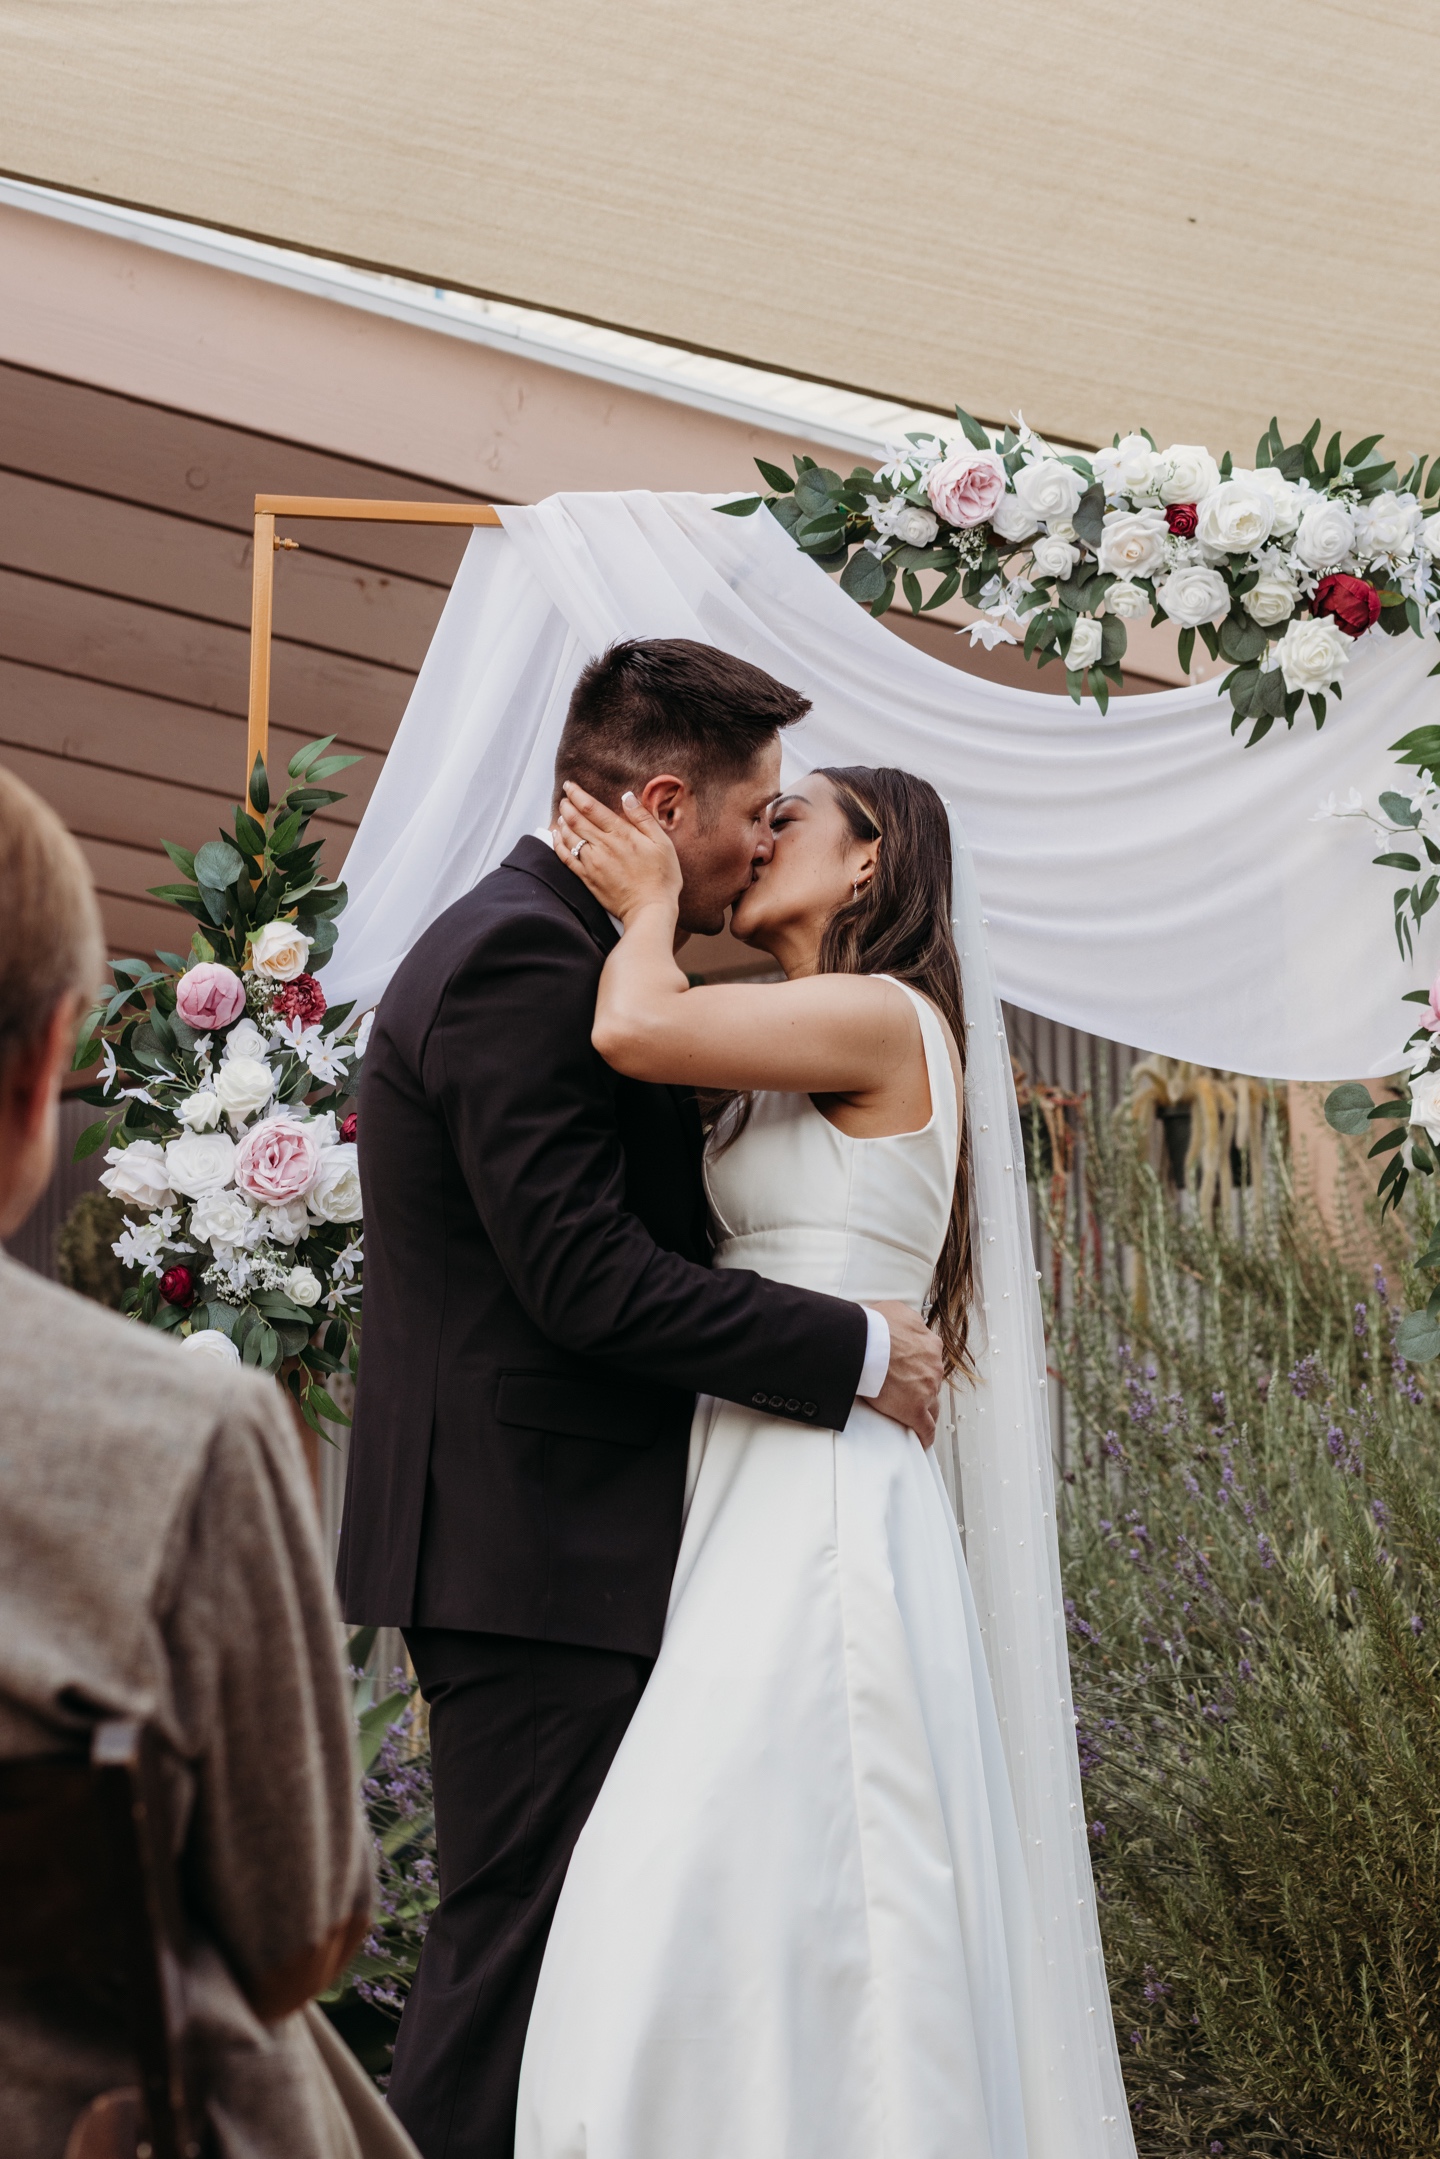 Bride and groom's first kiss as husband and wife. Liz Koston Photography.